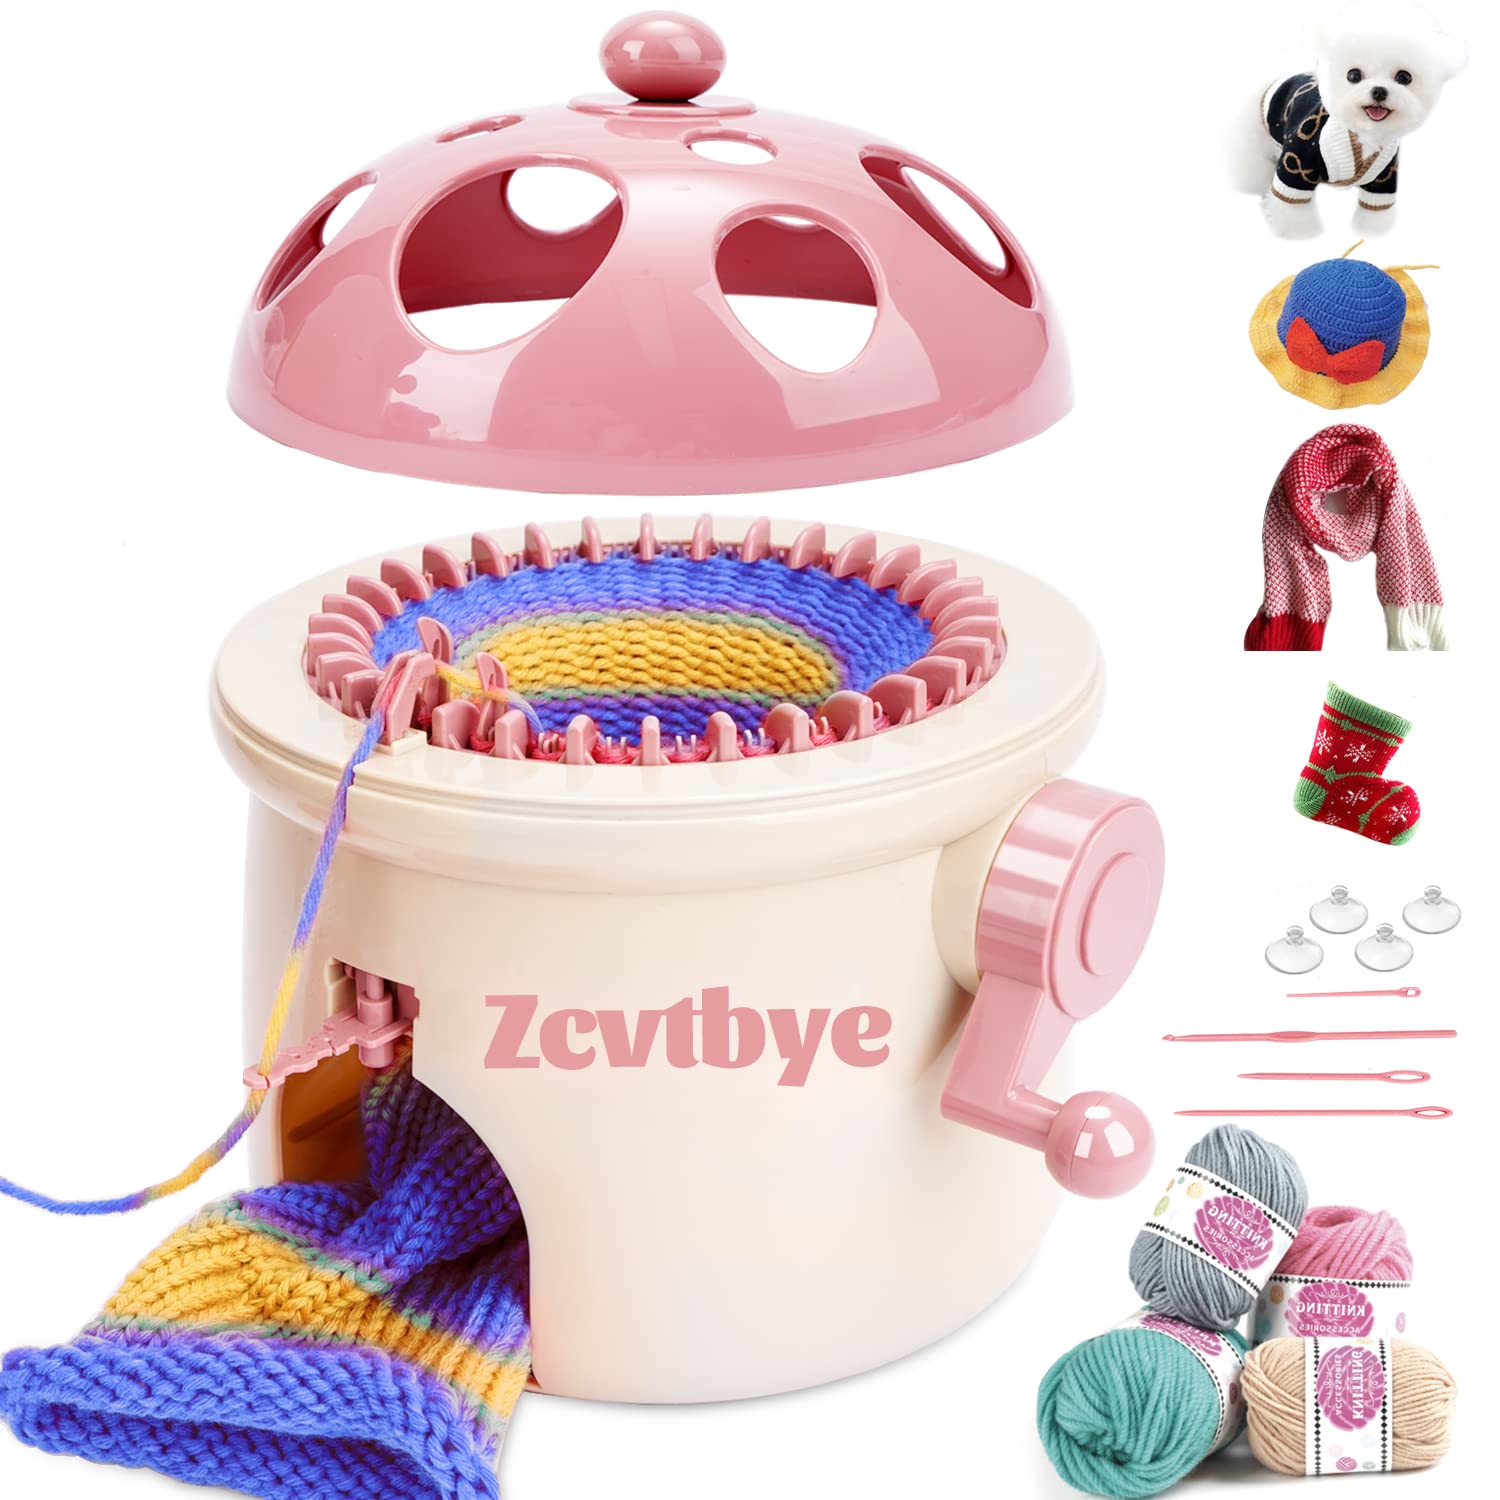  Umootek Knitting Machine, Knitting Board Rotating Double  Loom,Smart Weaving Loom Round Knitting Machines, 22 Needles Knitting  Machines Weaving Loom Kit for Adults and Kids : Arts, Crafts & Sewing